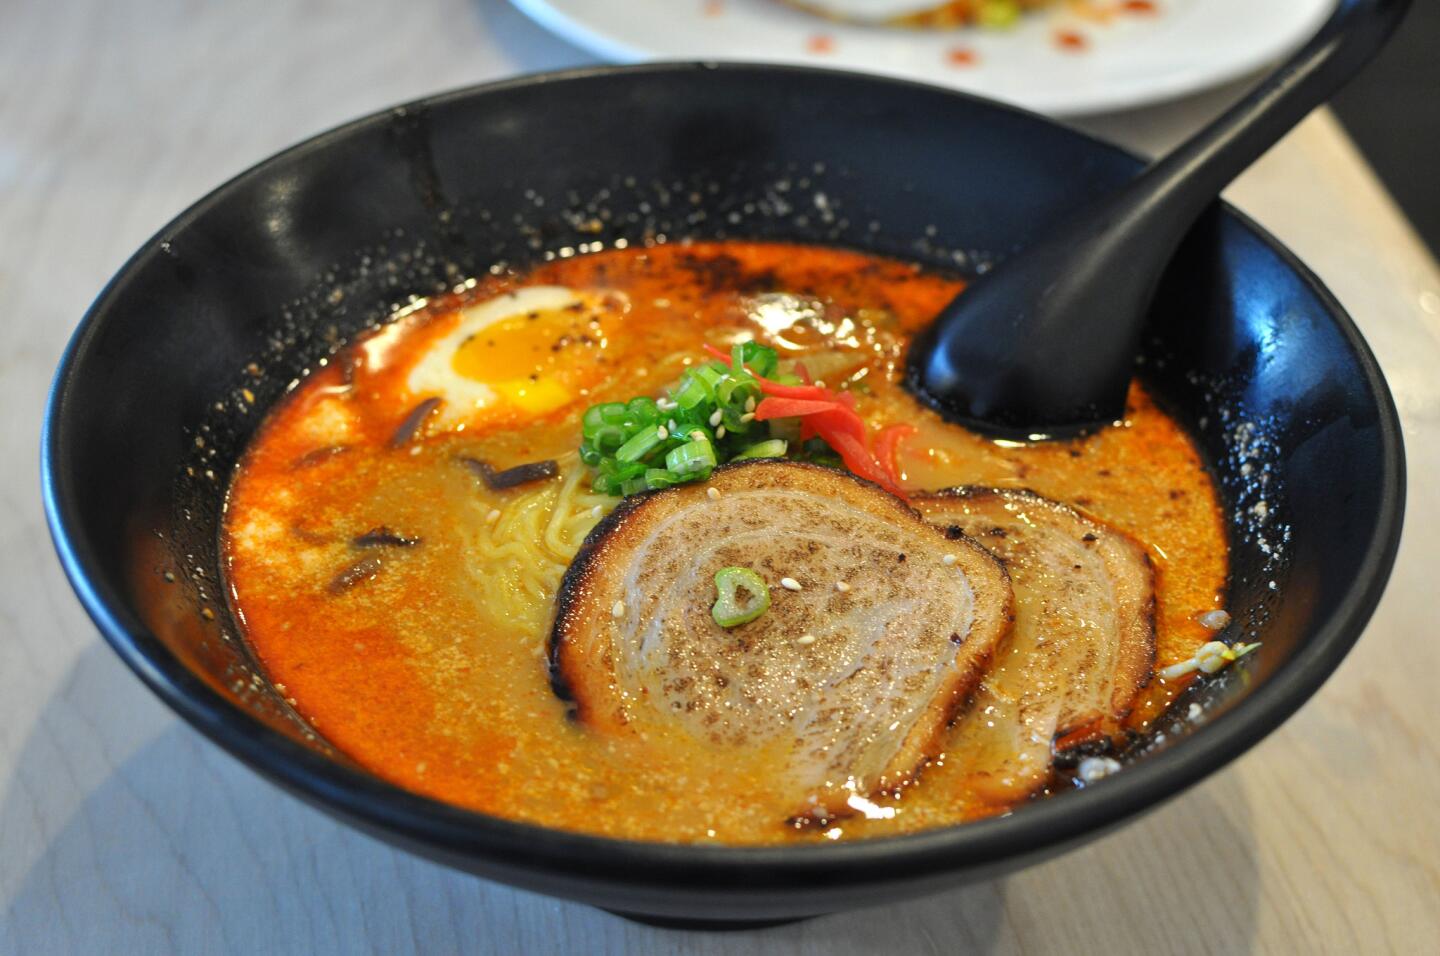 Spicy miso ramen should cure whatever ails you.